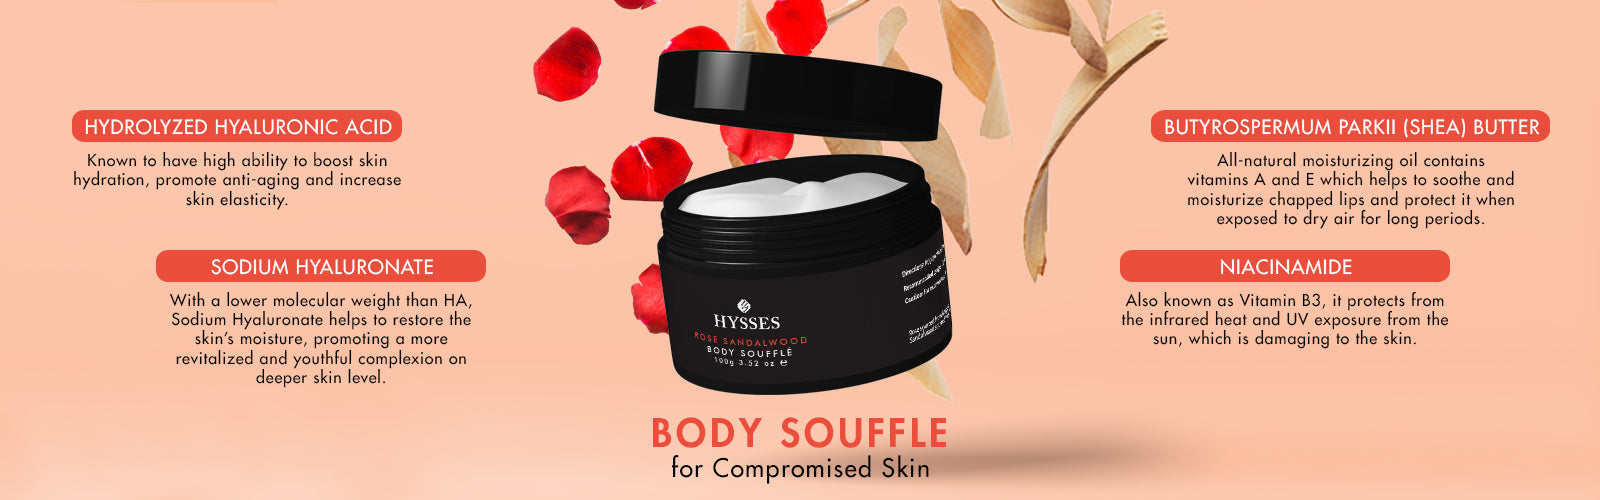 Compromised Skin Souffle